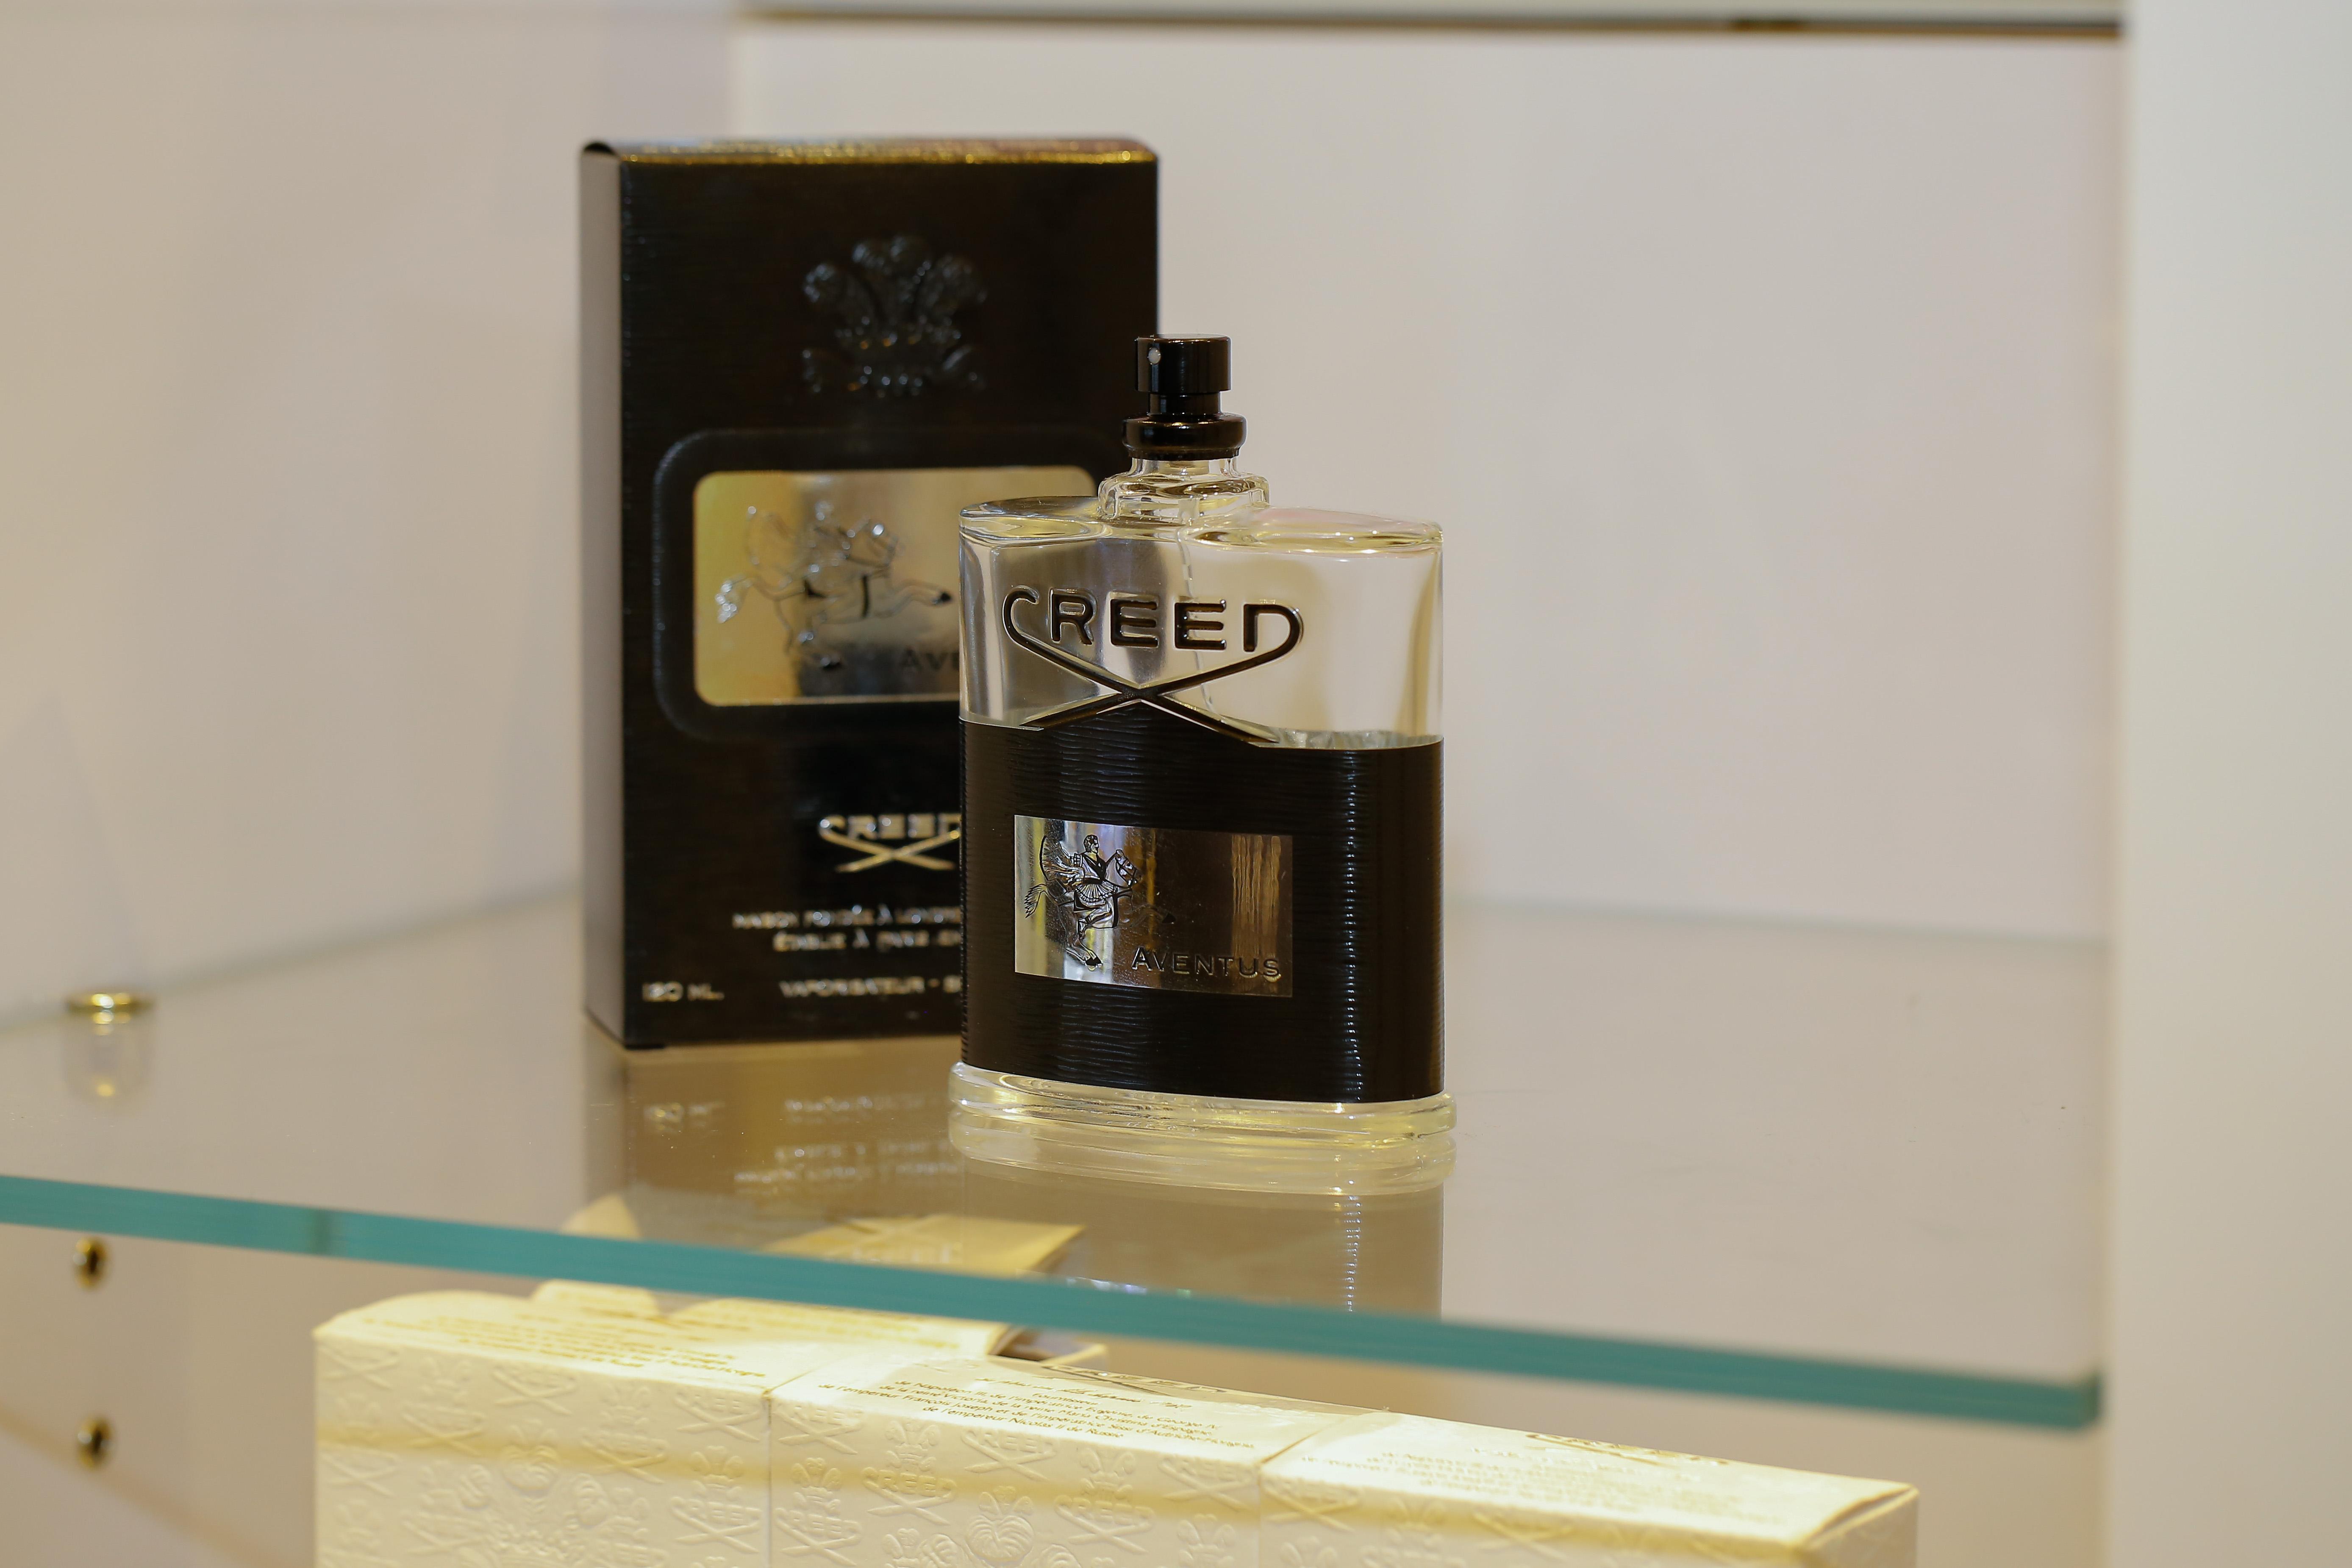 Why Gucci owner Kering is acquiring fragrance label Creed: CEO